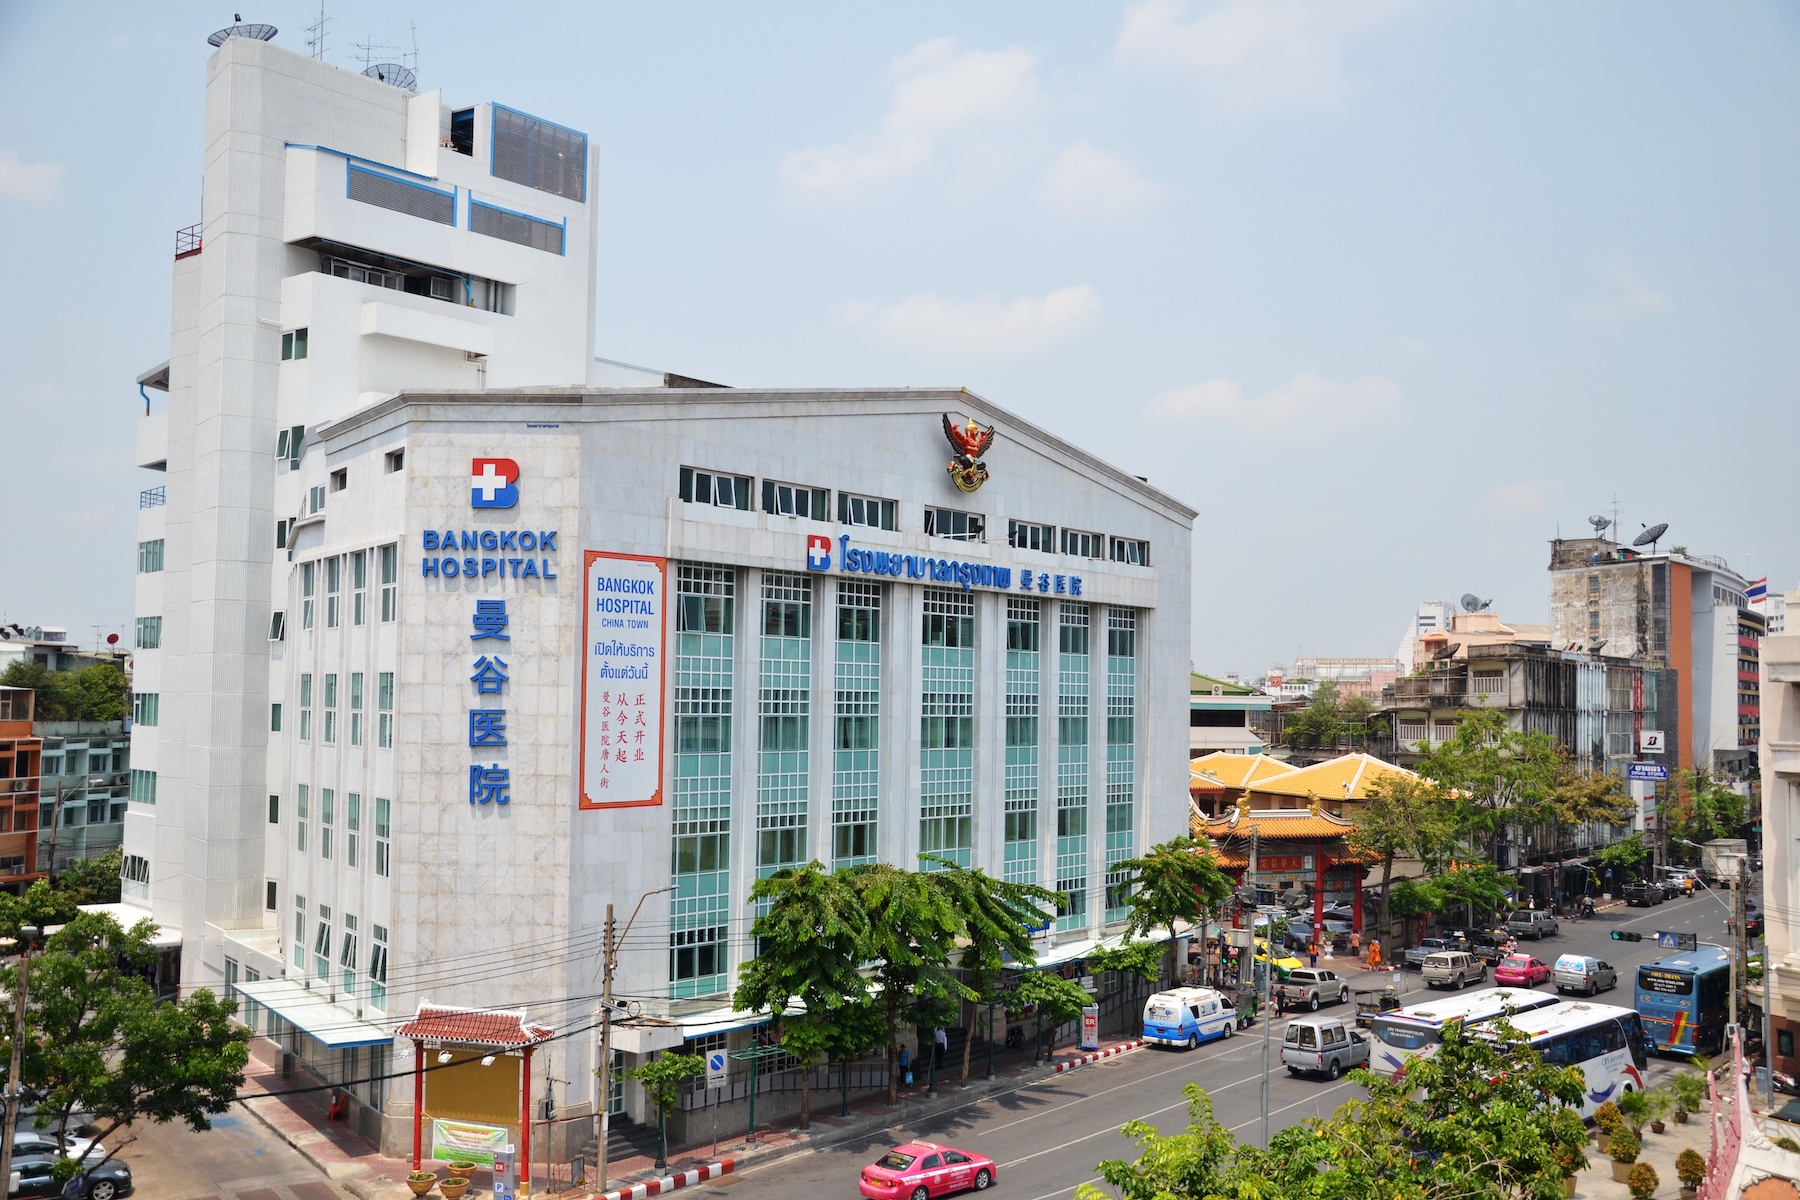 Bangkok Hospital in Bangkok's Chinatown sits on the corner of a busy street
